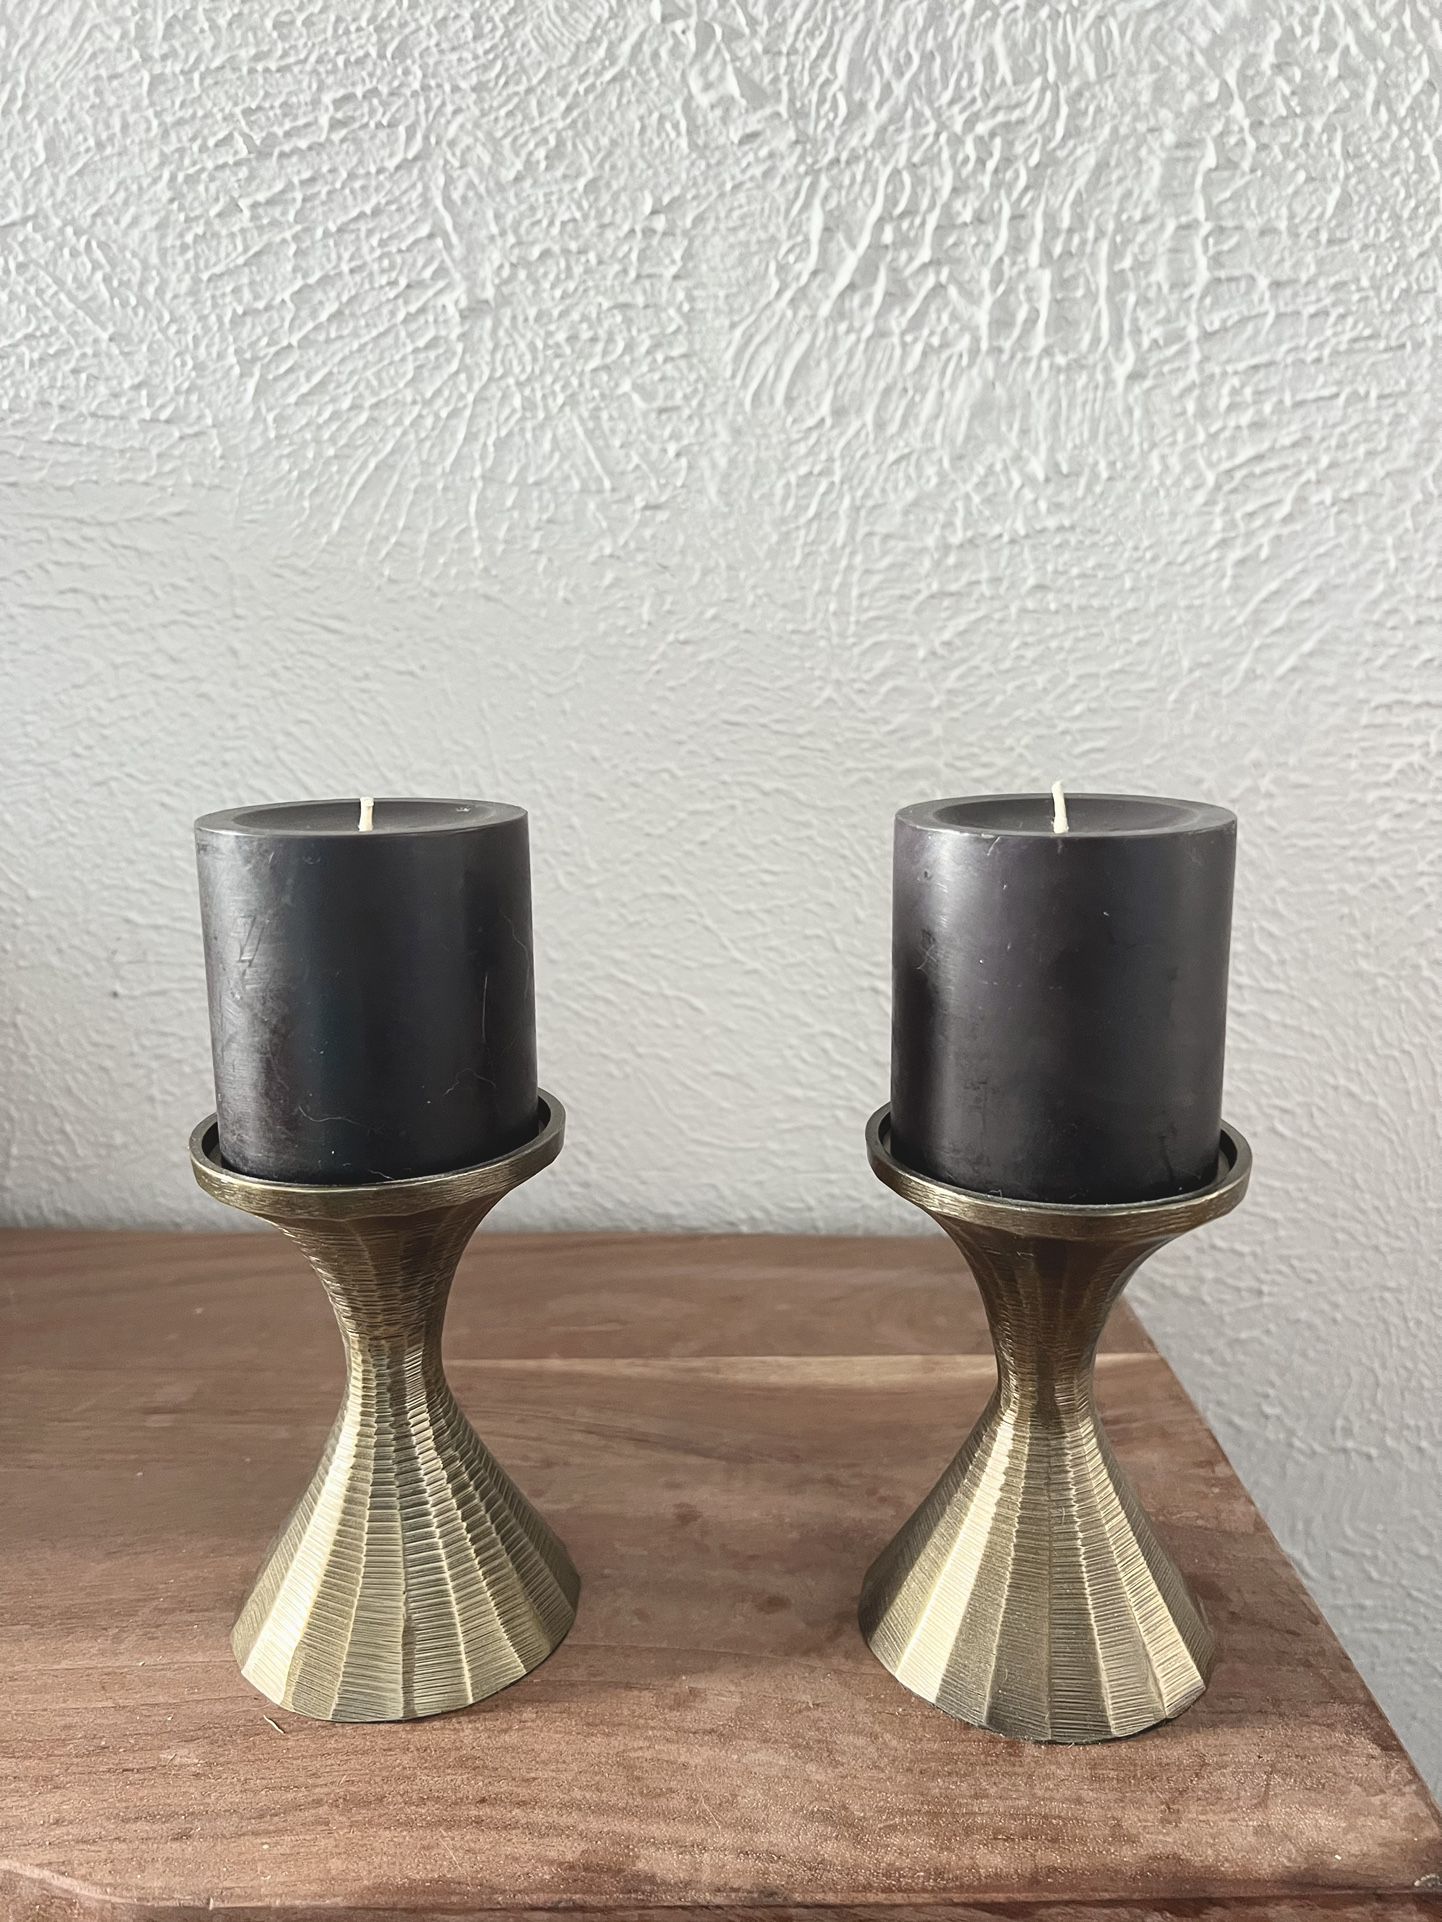 Perfect: World Market Candle Holders, Antique Ribber Brass Gold, 5” tall, candle included